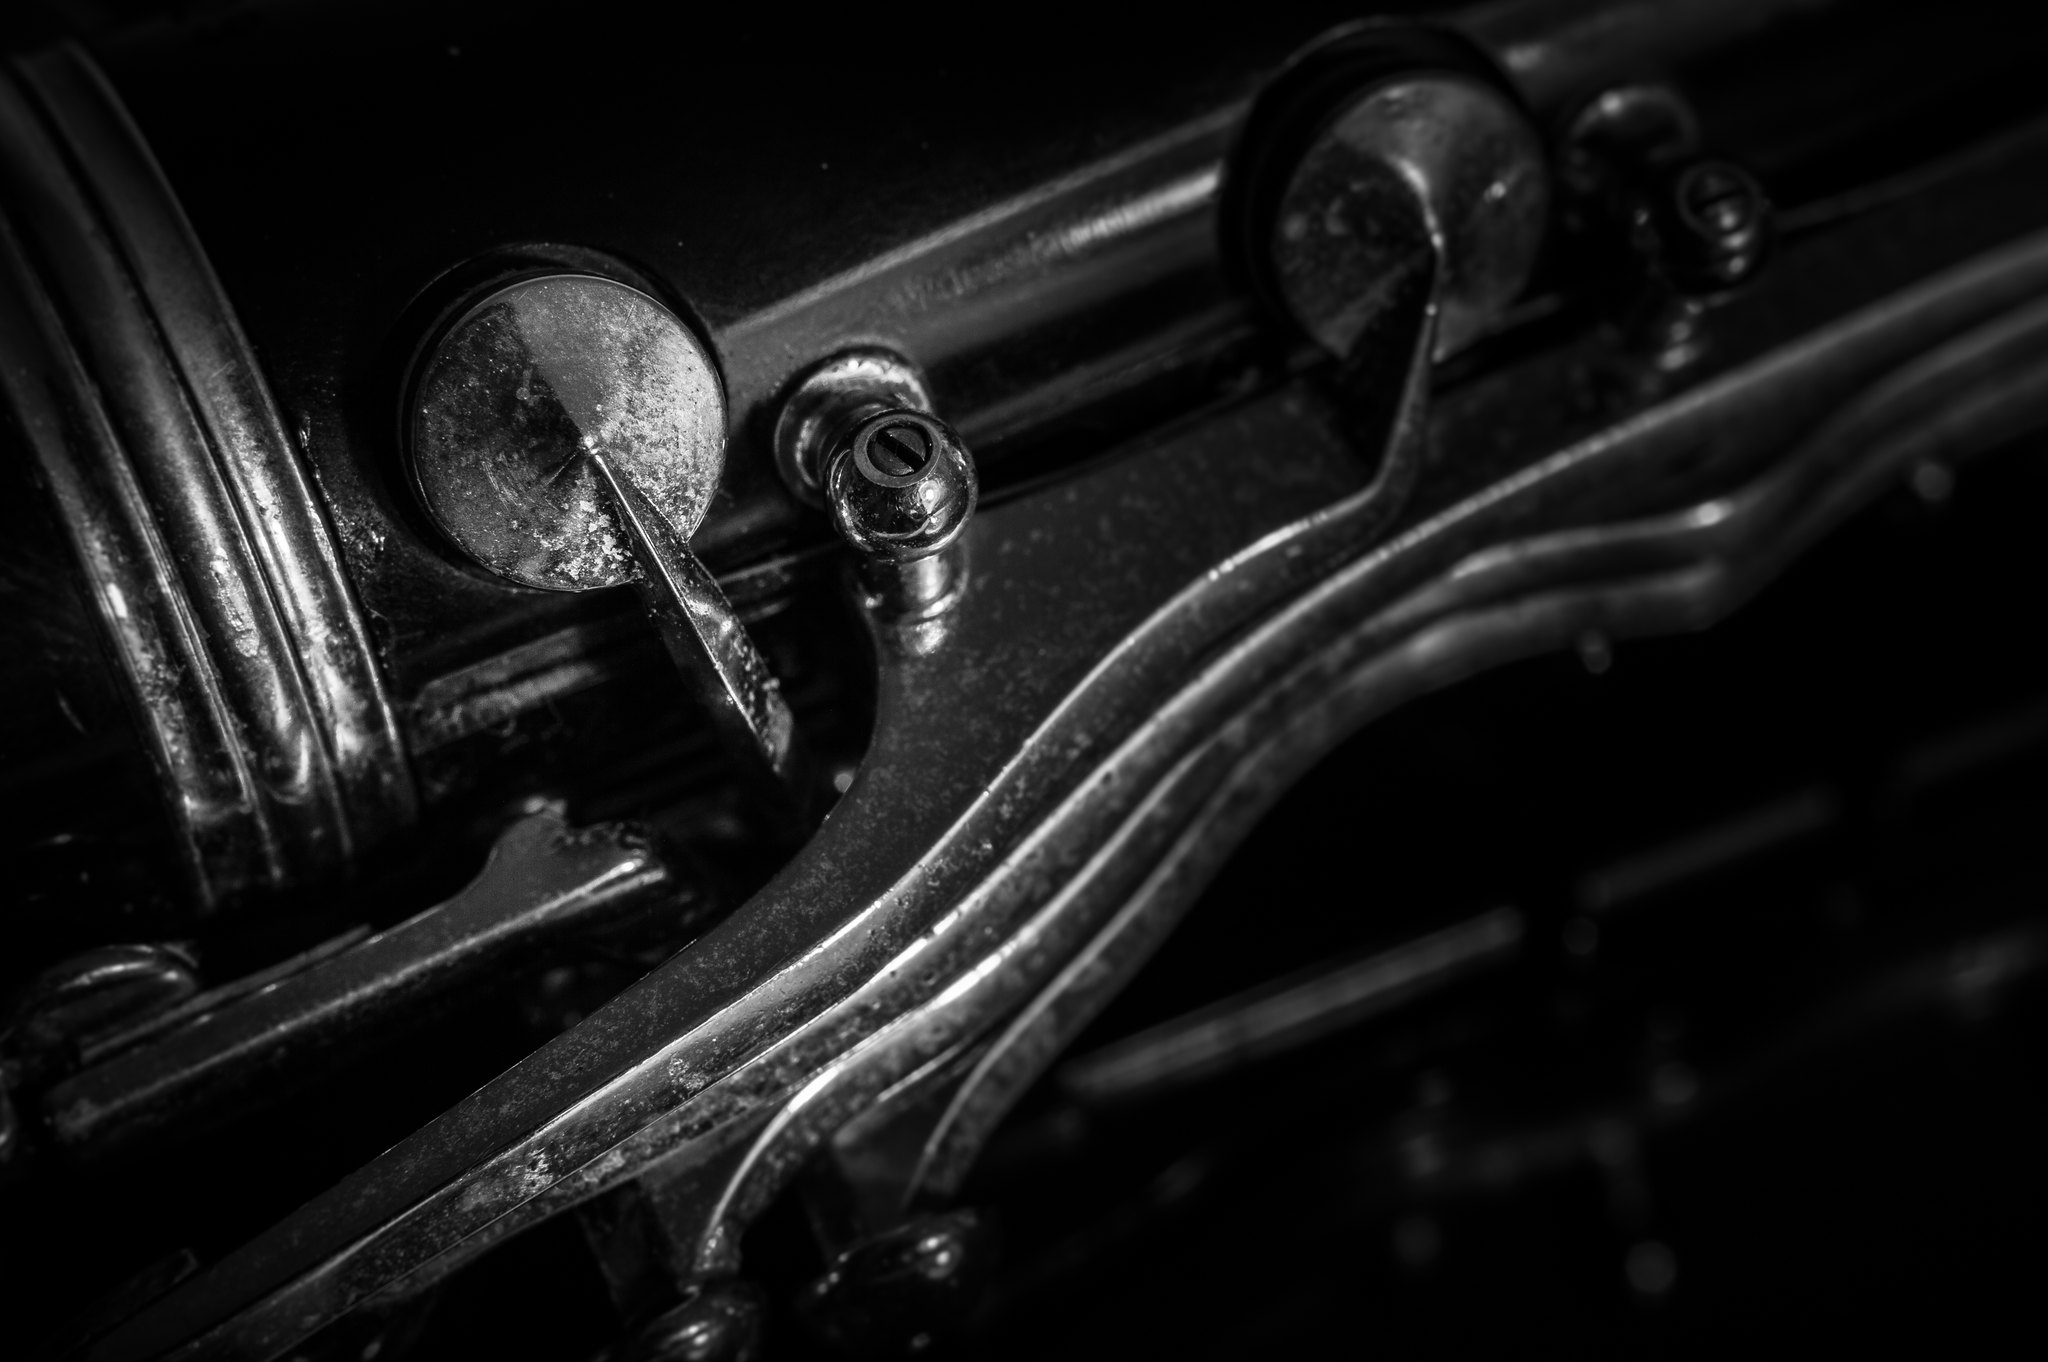 “Clarinet” © Ted Rabbitts; Creative Commons license